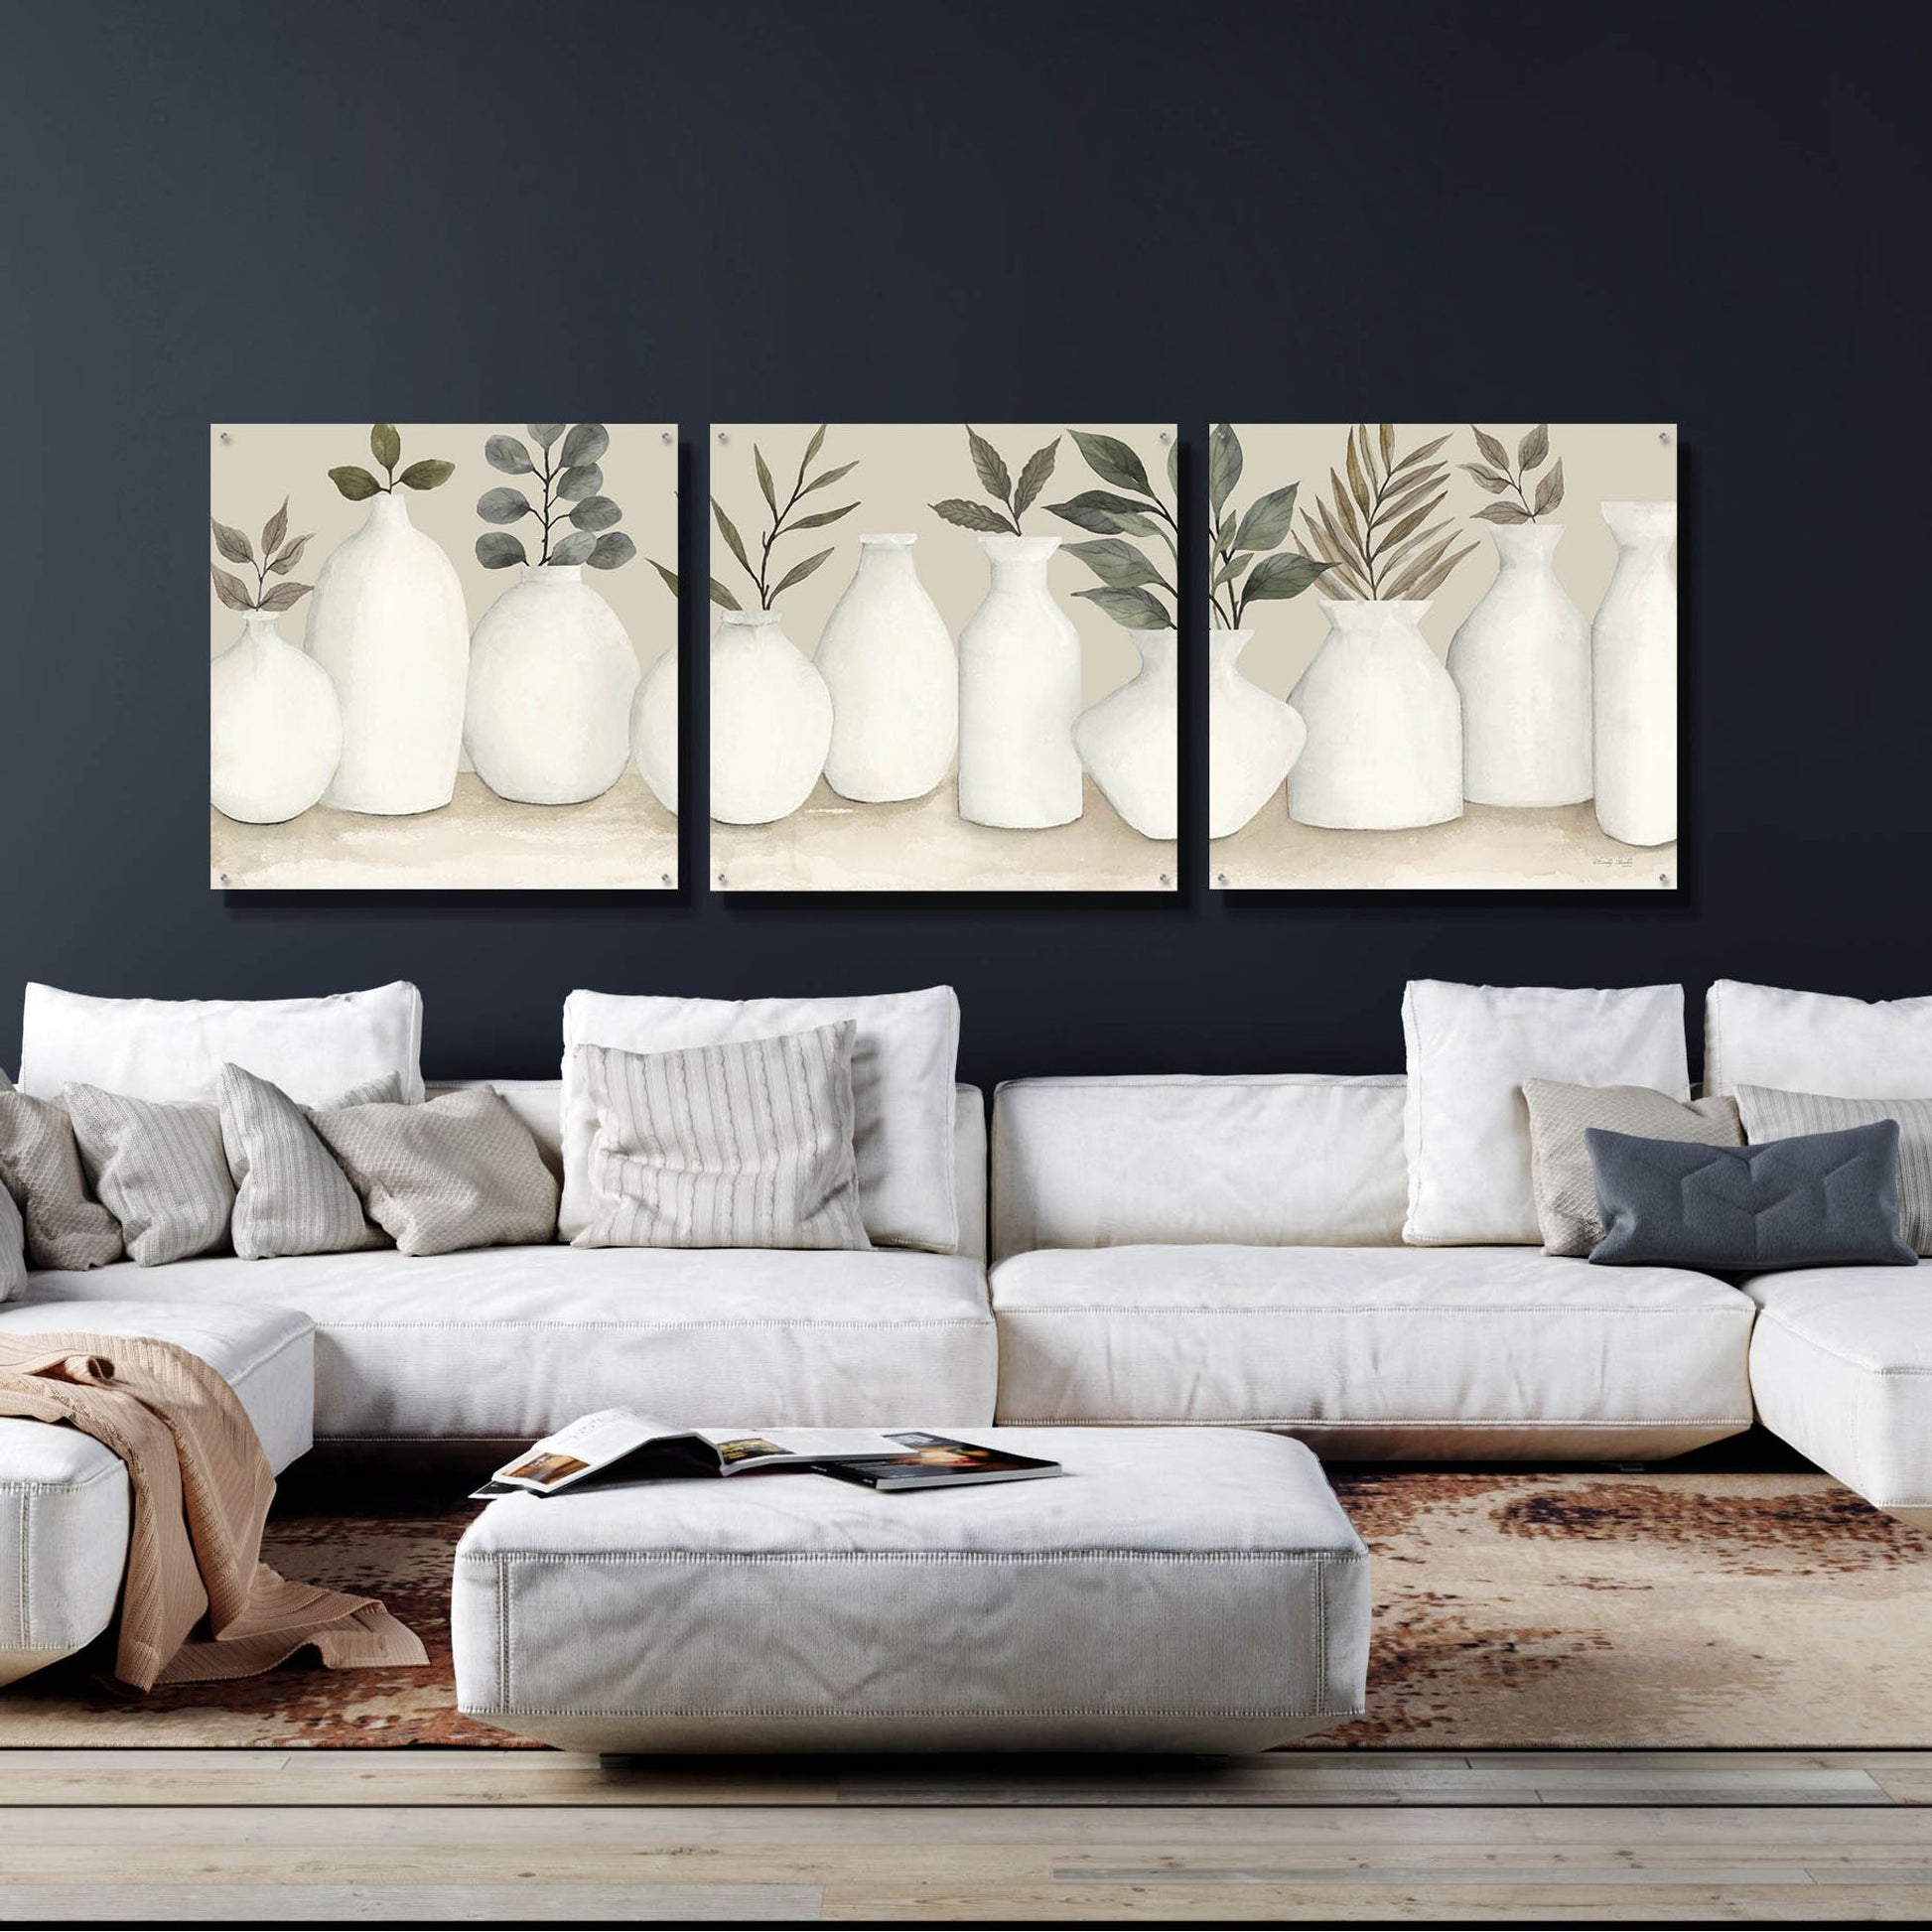 Epic Art 'Ivory Vases in a Row' by Cindy Jacobs, Acrylic Glass Wall Art, 3 Piece Set,108x36